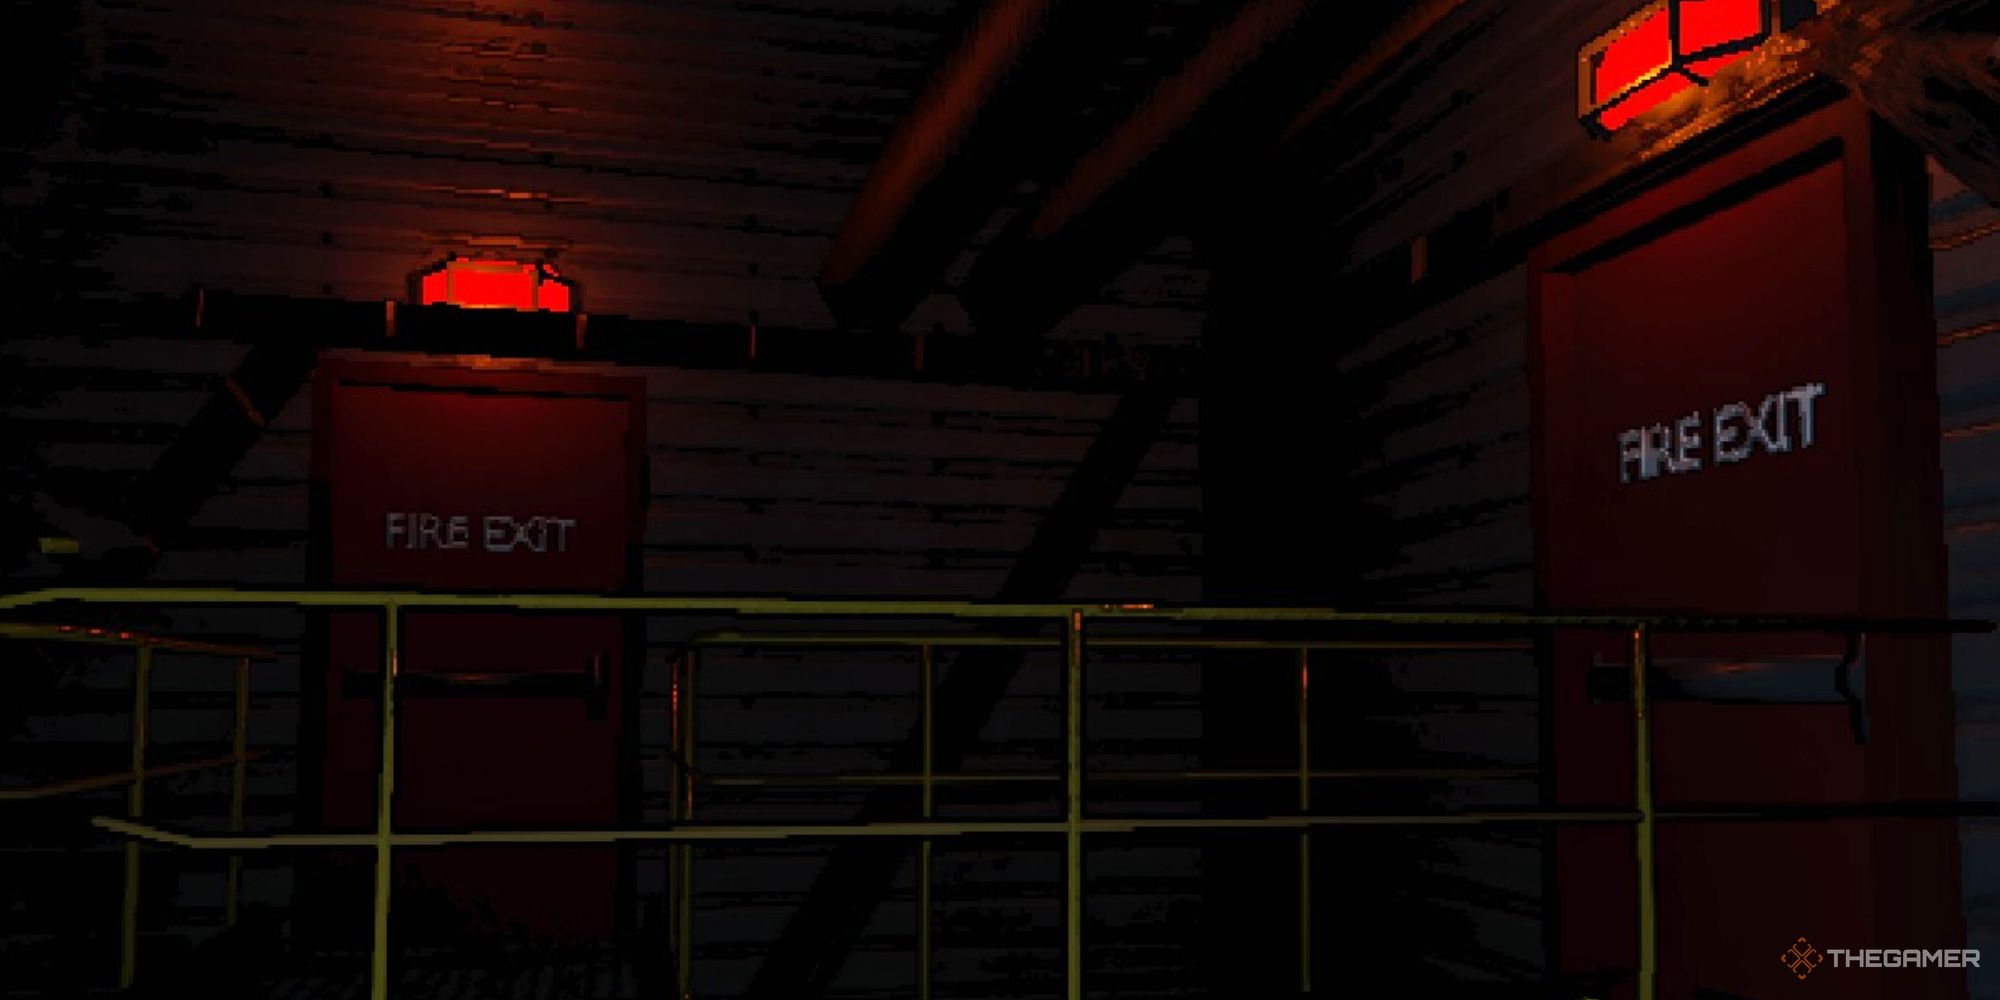 A screenshot from Lethal Company Showing two red fire exit doors right next to each other on Experimentation, which only has one exit